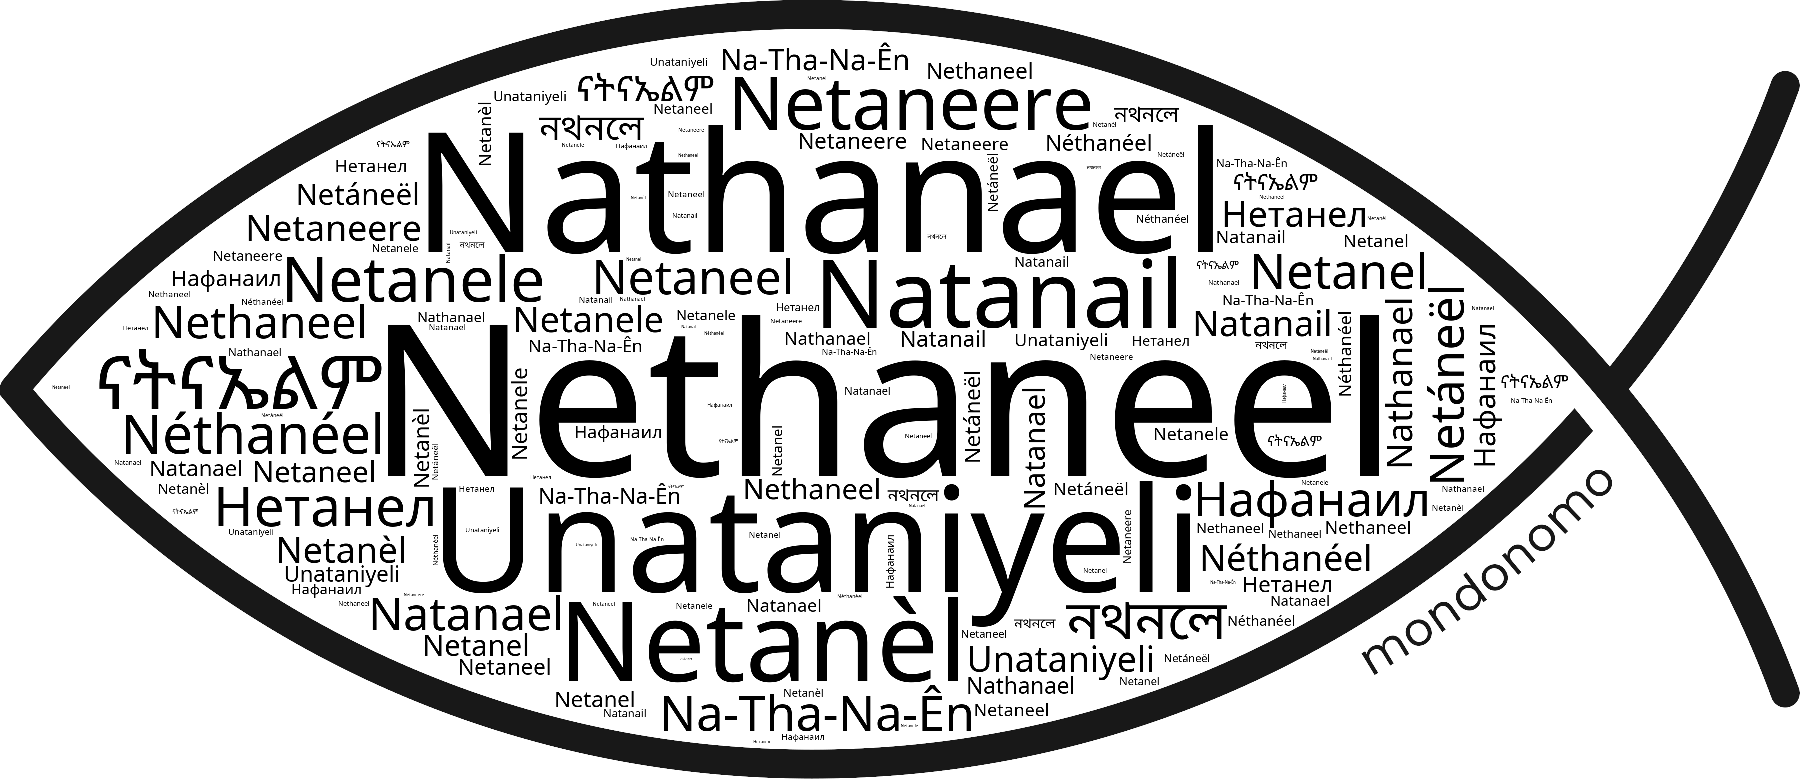 Name Nethaneel in the world's Bibles